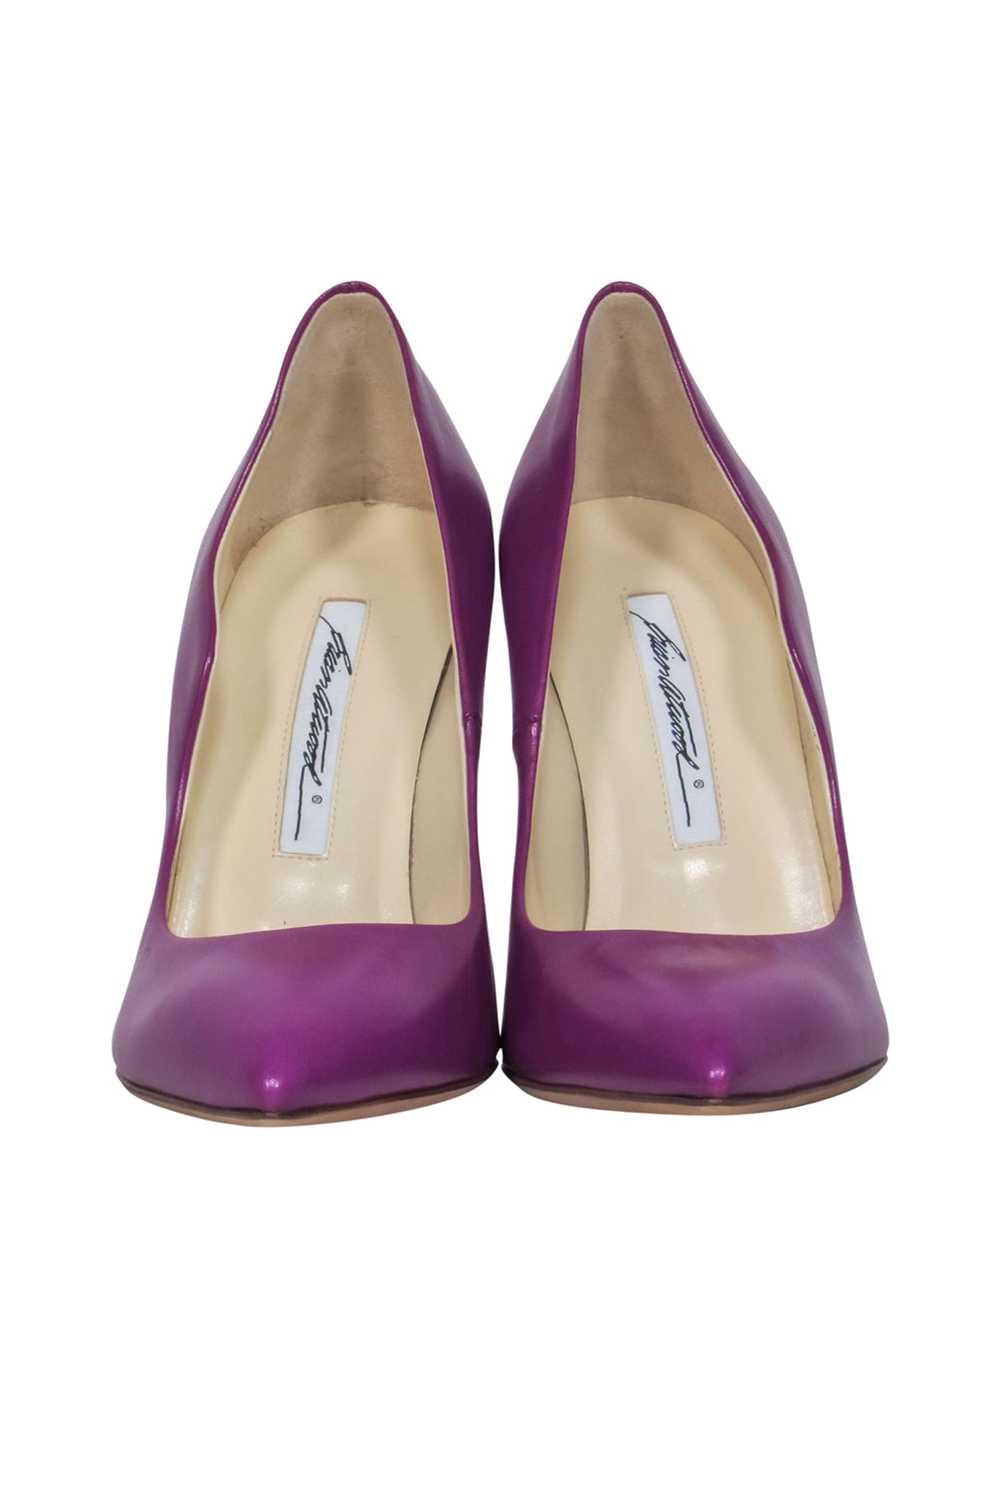 Brian Atwood - Purple Leather Pointed Toe Pumps S… - image 2